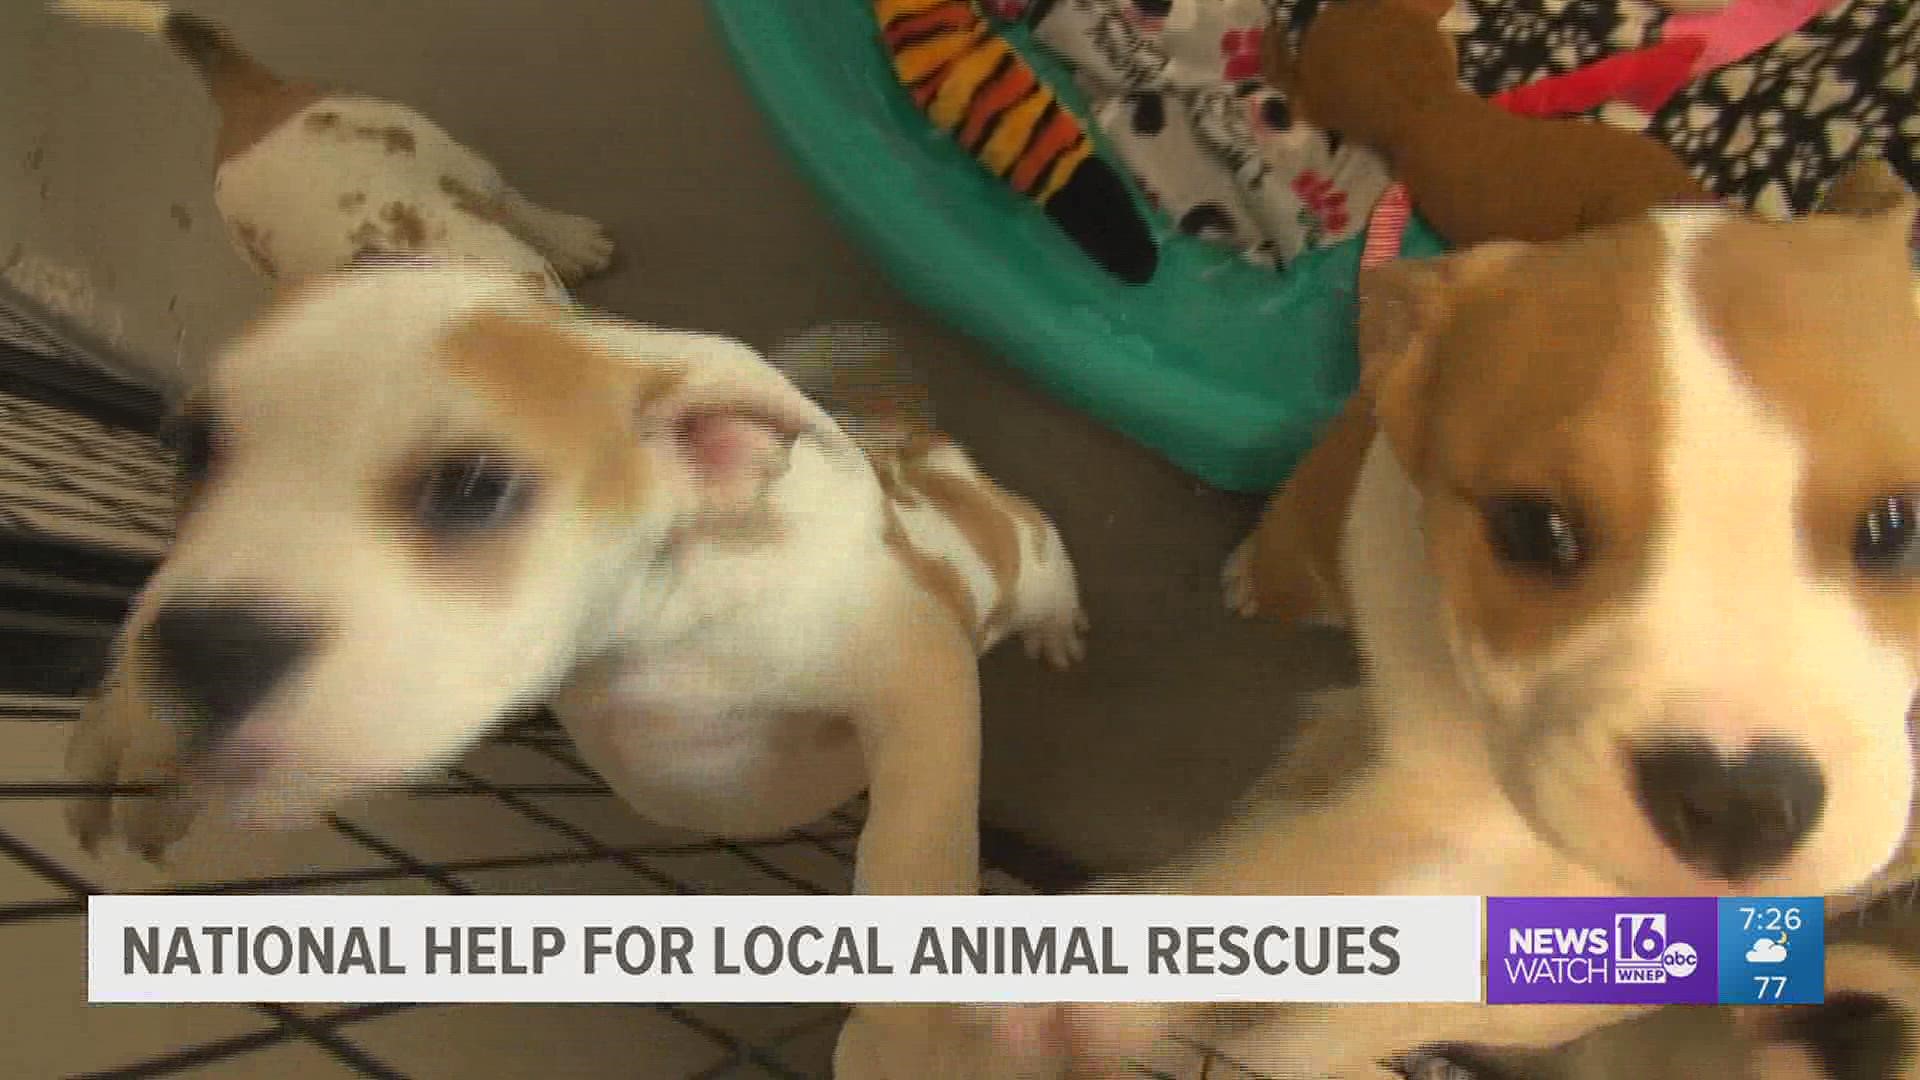 An animal rescue in Susquehanna County Is getting some unexpected fundraising help from a rescue group touring the country.